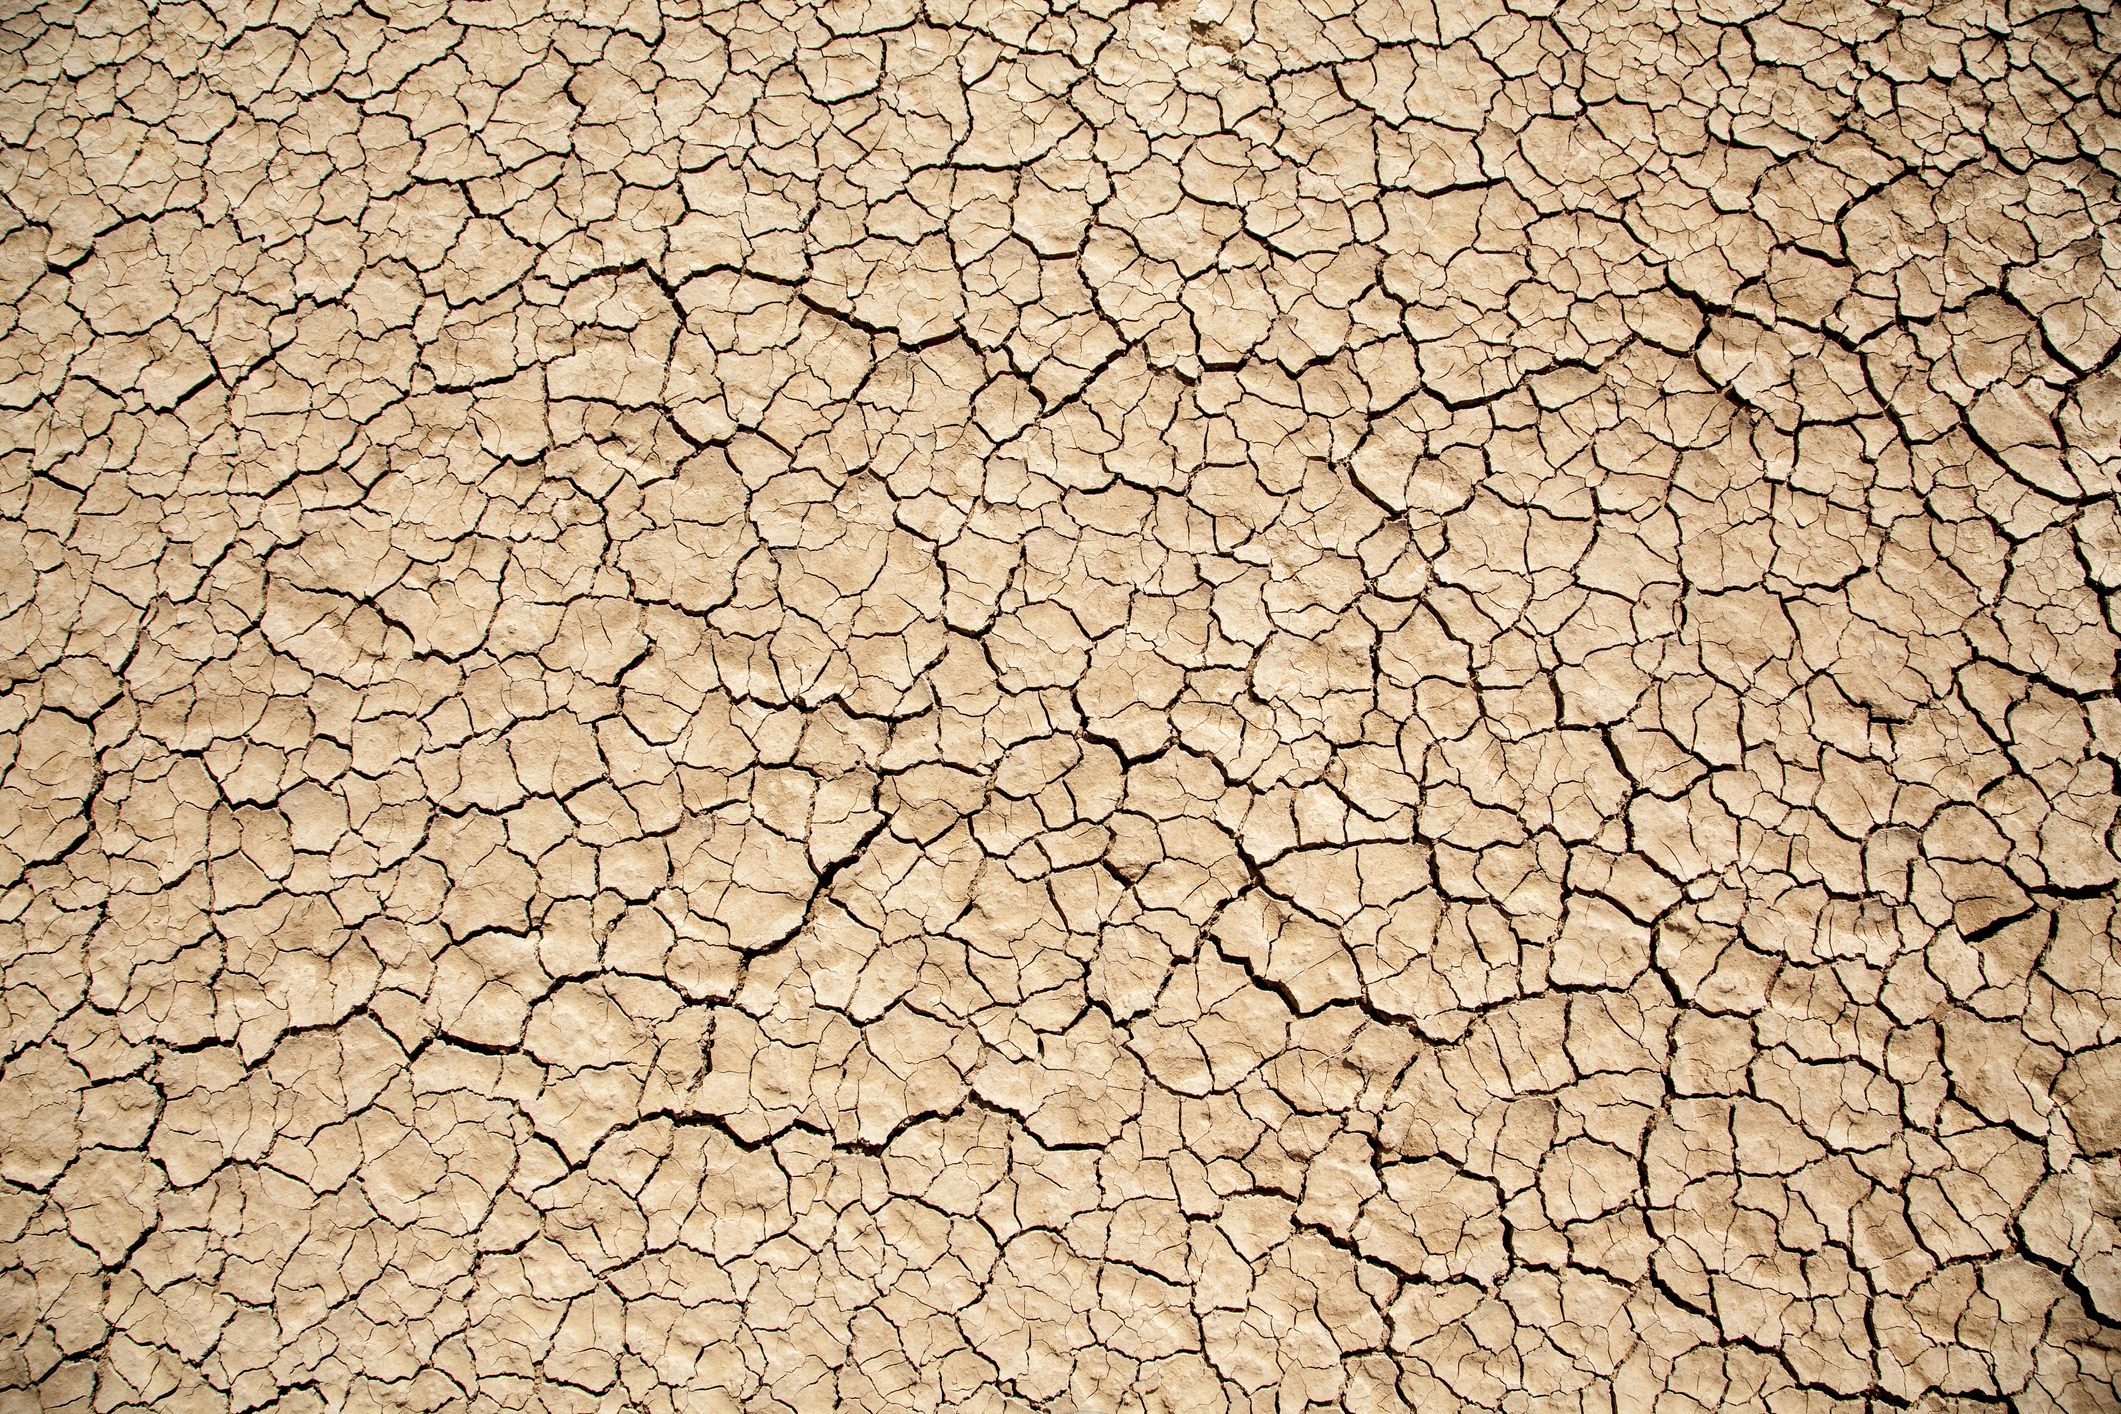 where is the driest desert in the world